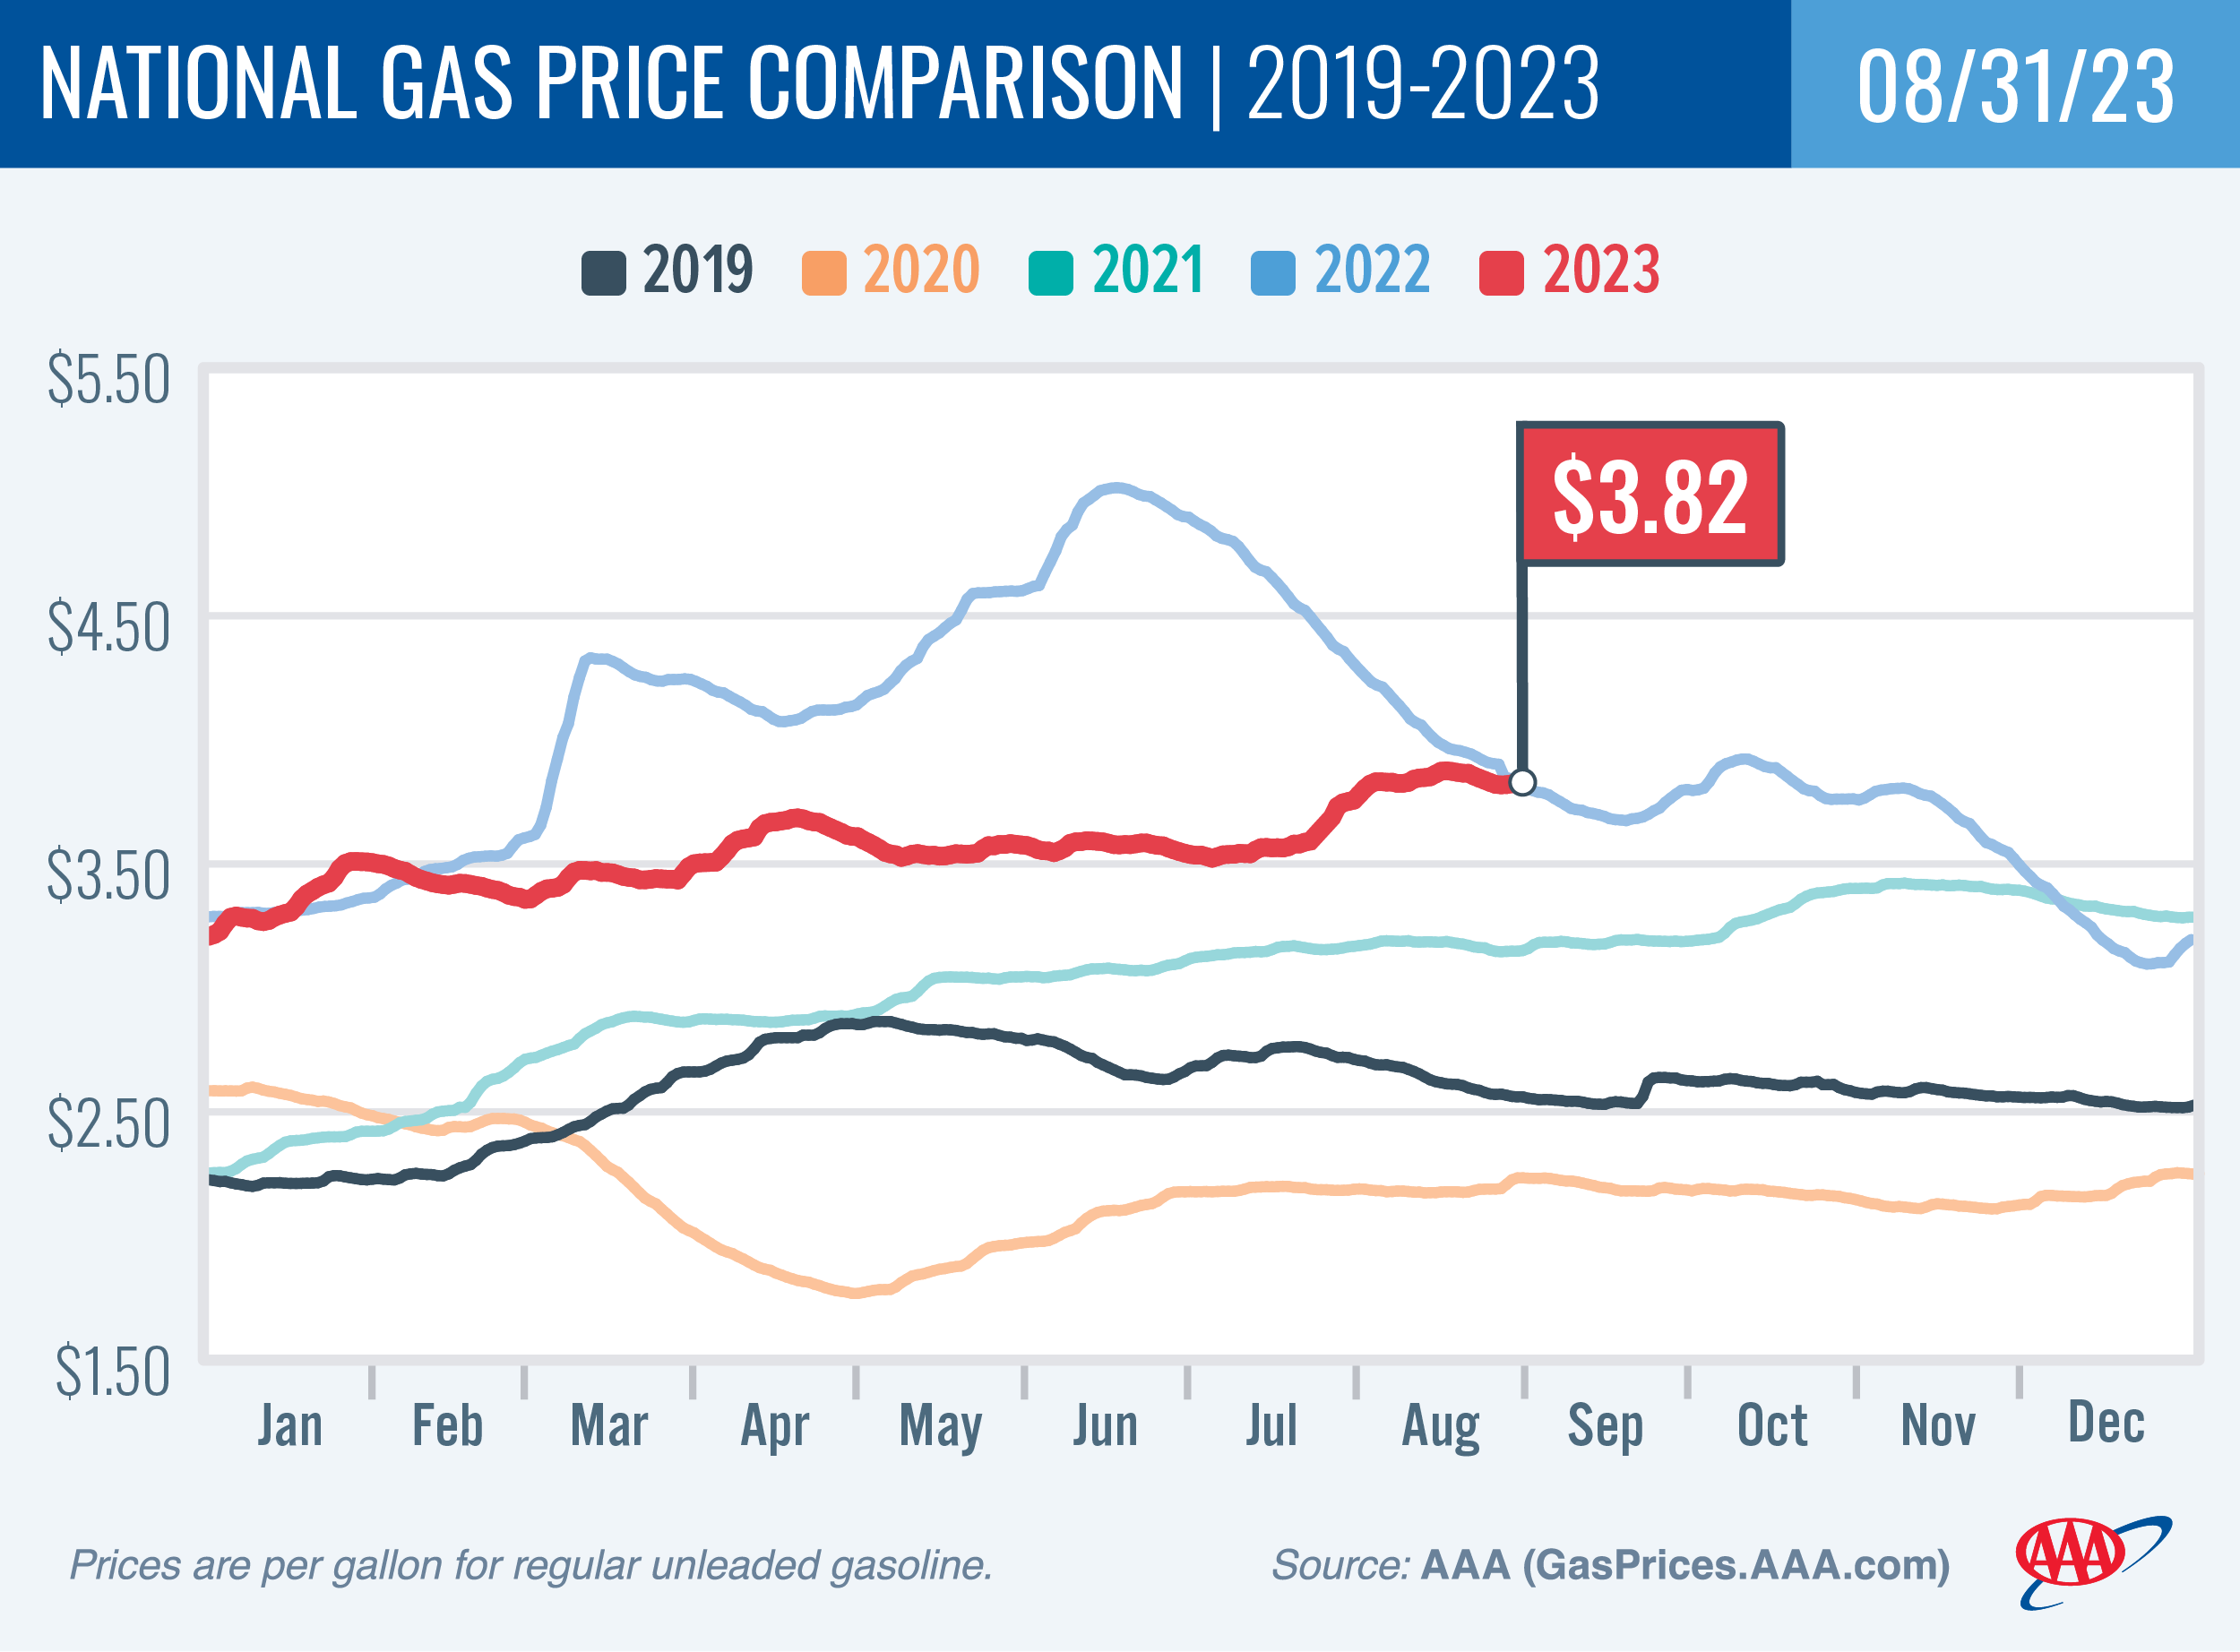 National Gas Price Comparison for August 31, 2023